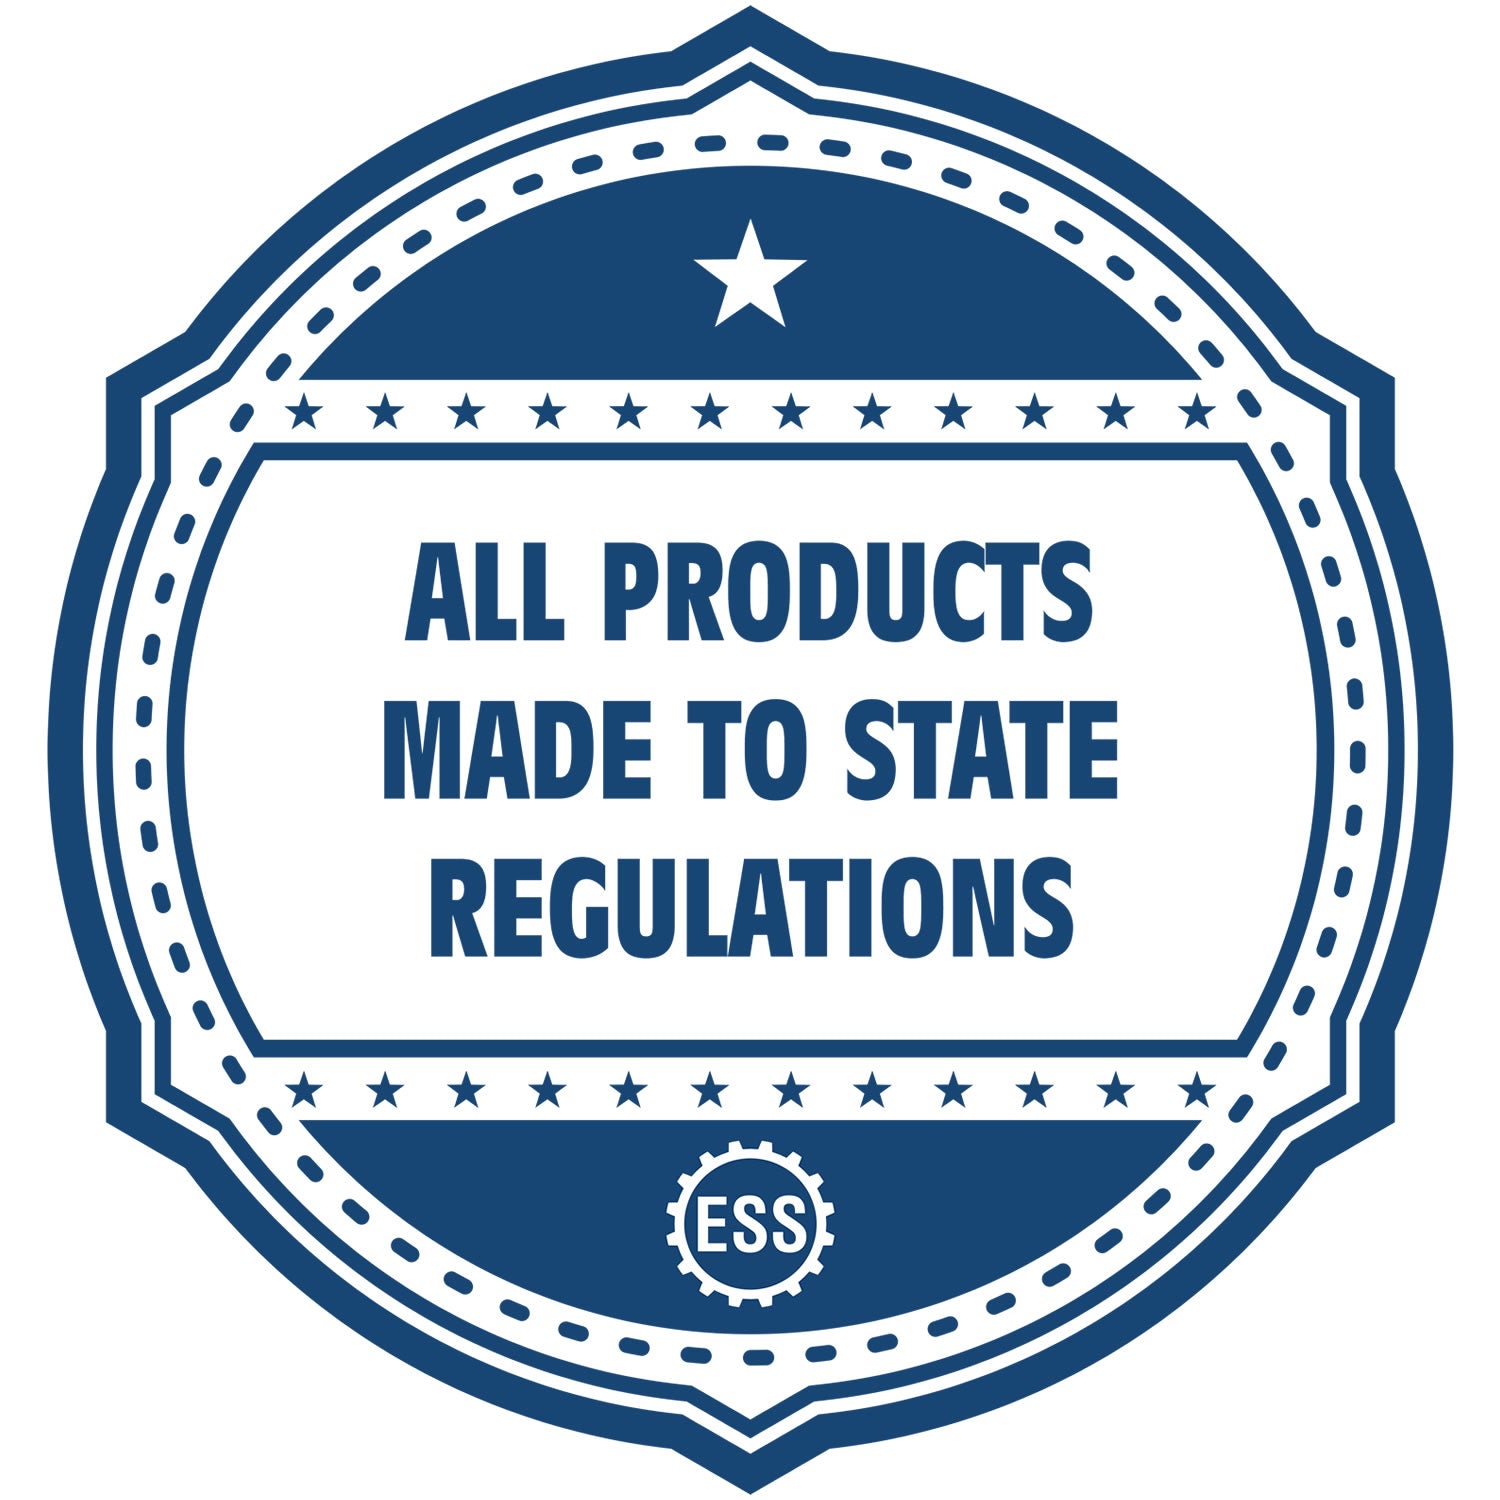 An icon or badge element for the Premium MaxLight Pre-Inked Puerto Rico Engineering Stamp showing that this product is made in compliance with state regulations.